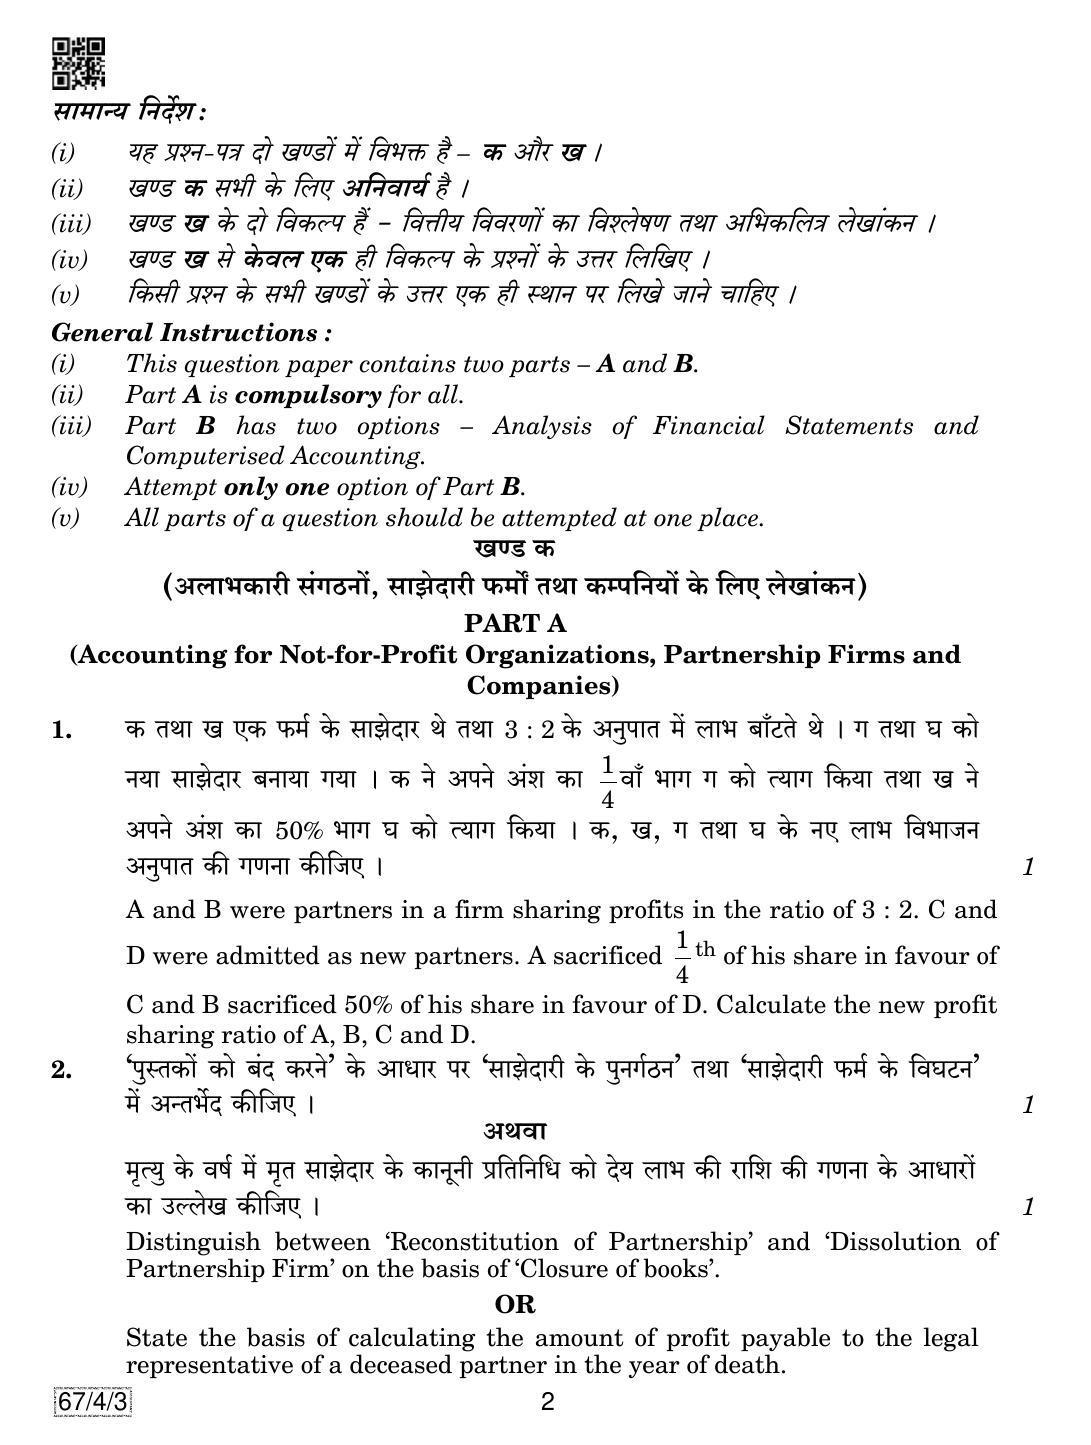 CBSE Class 12 67-4-3 Accountancy 2019 Question Paper - Page 2